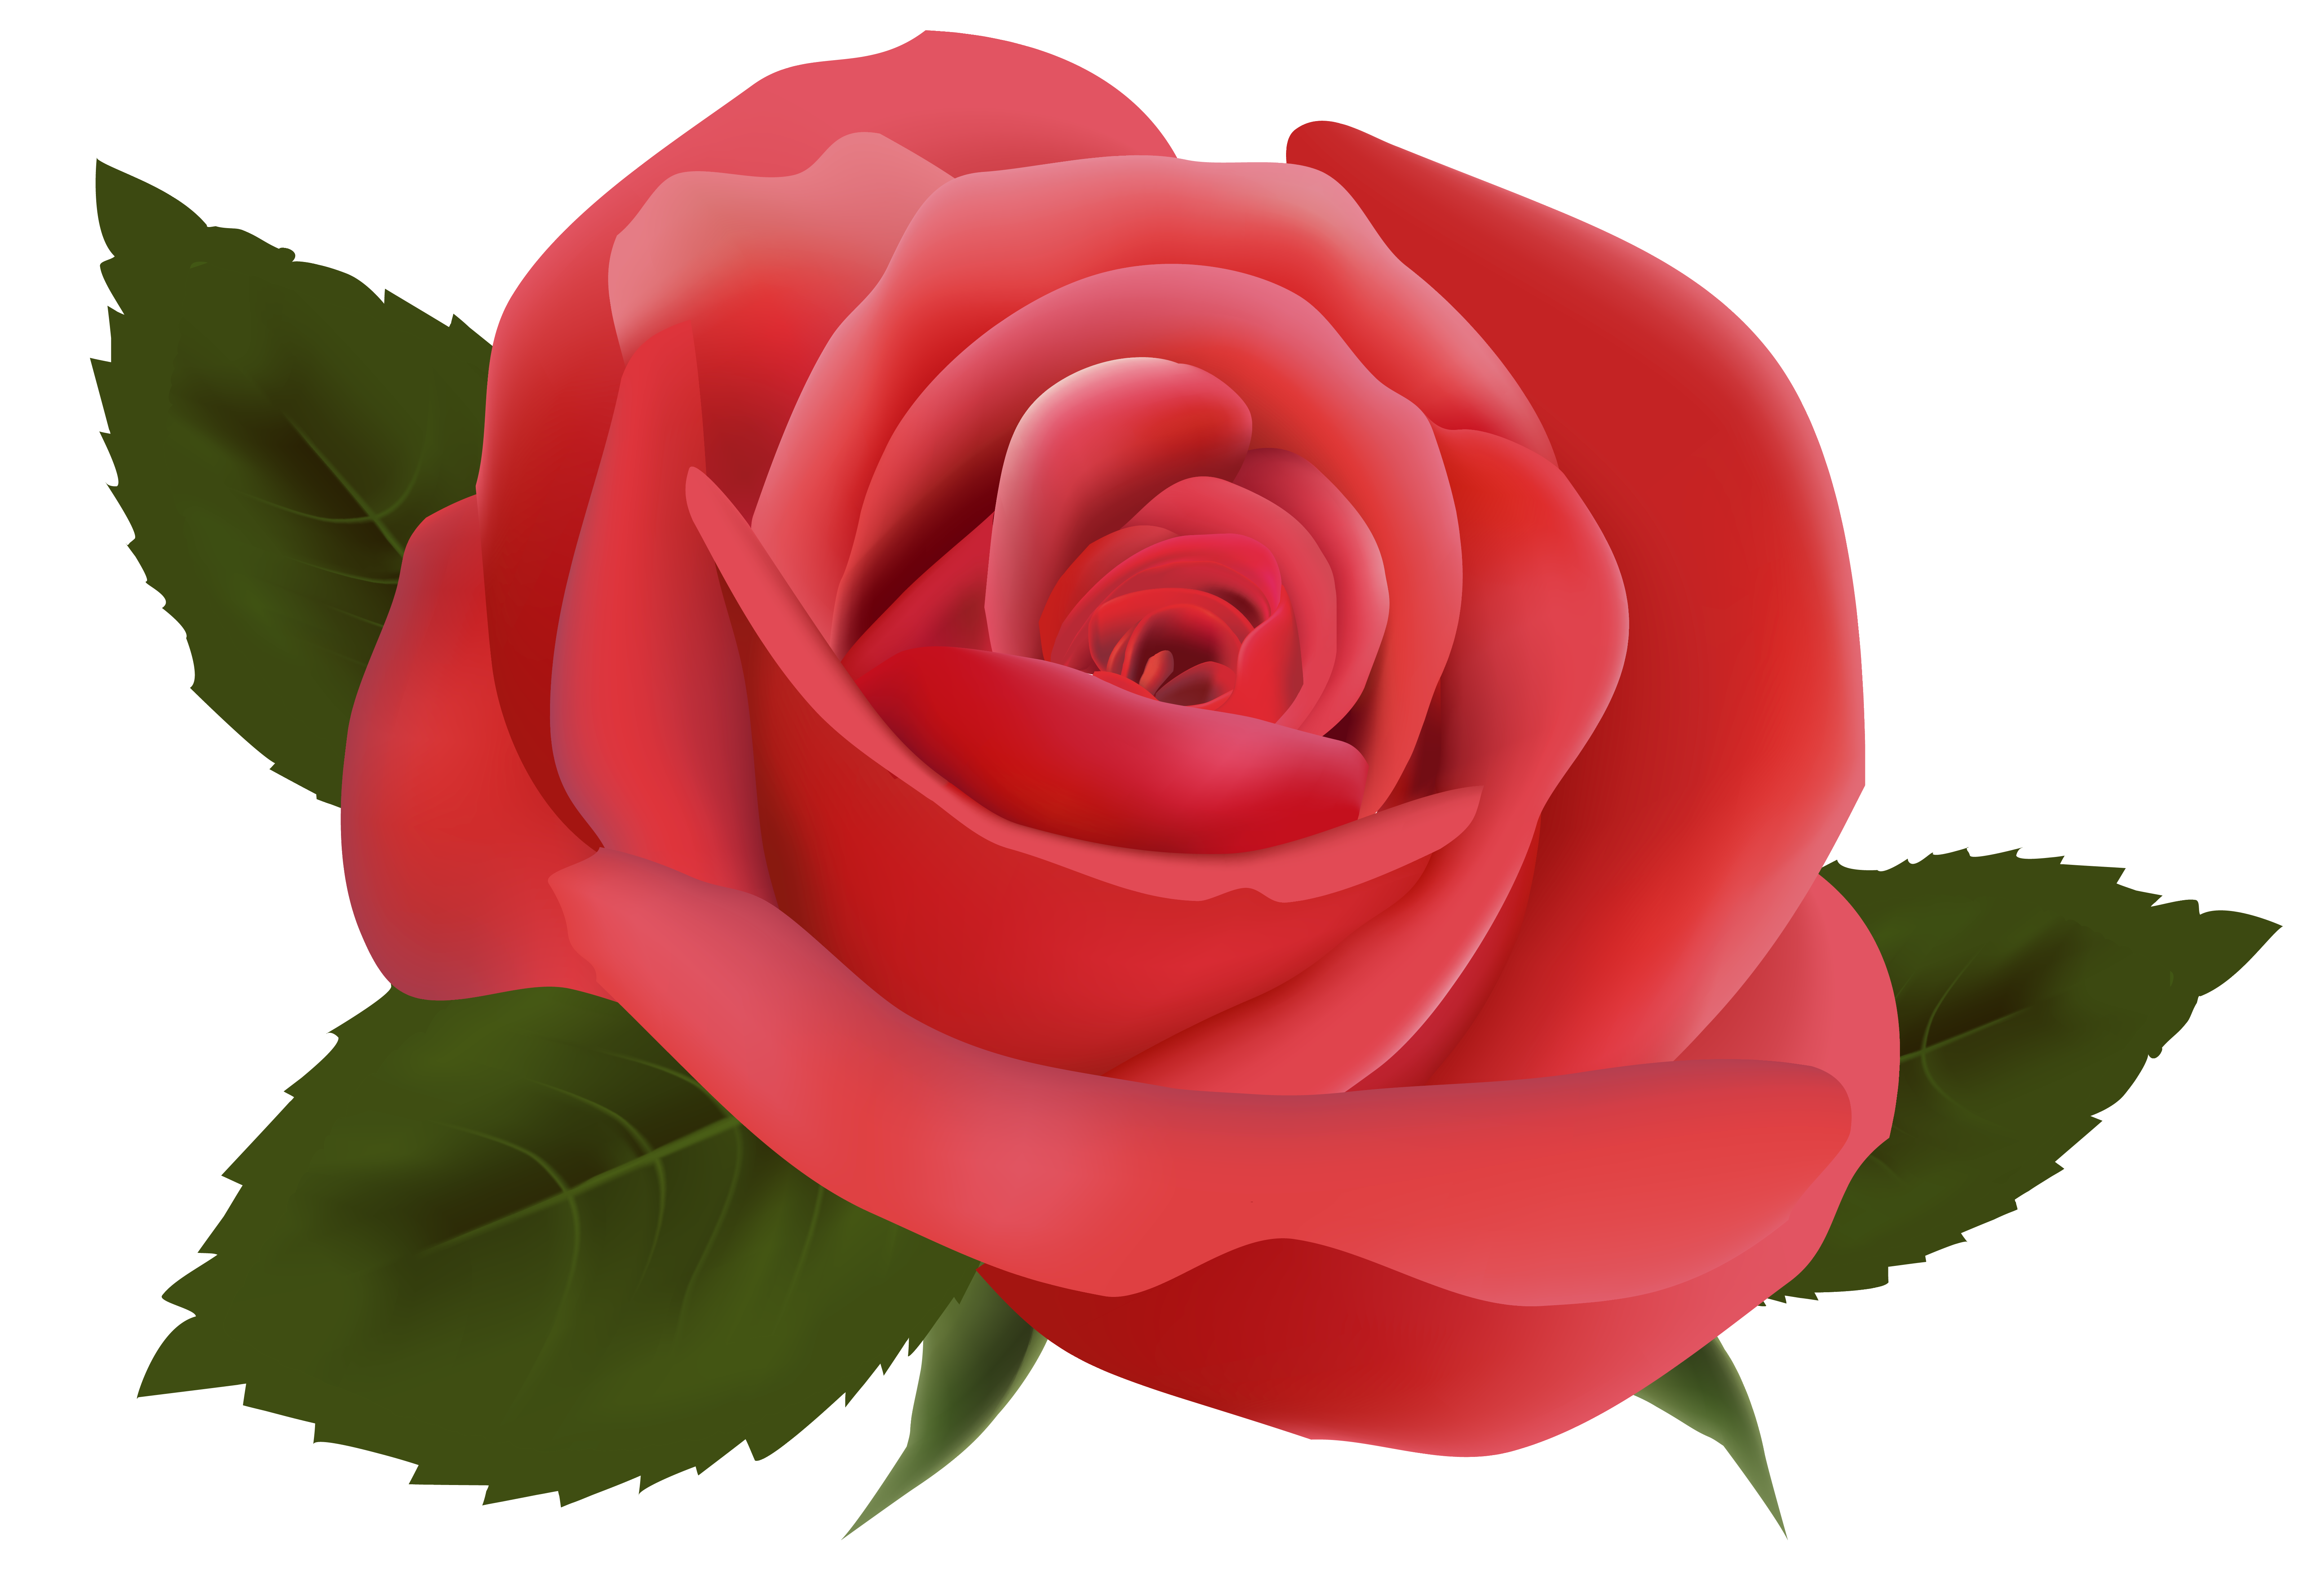 Red Rose PNG Image Clipart | Gallery Yopriceville - High-Quality ...